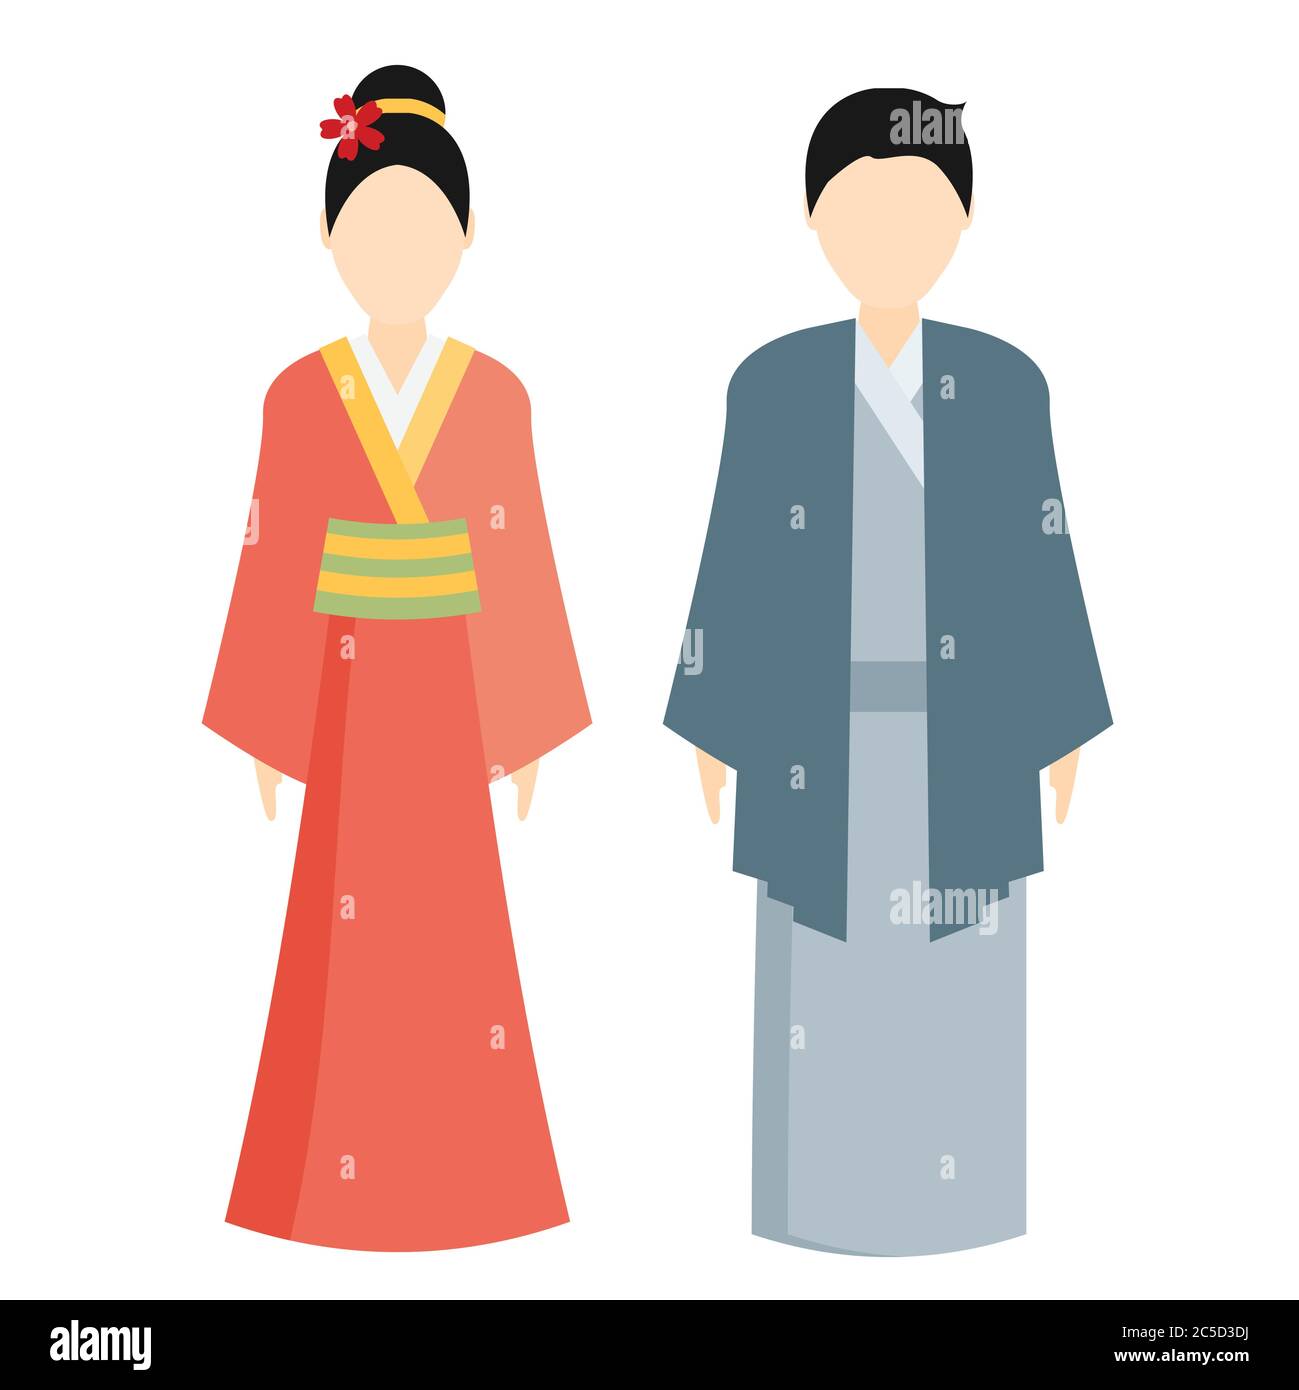 National costume of japan Stock Vector Images - Alamy